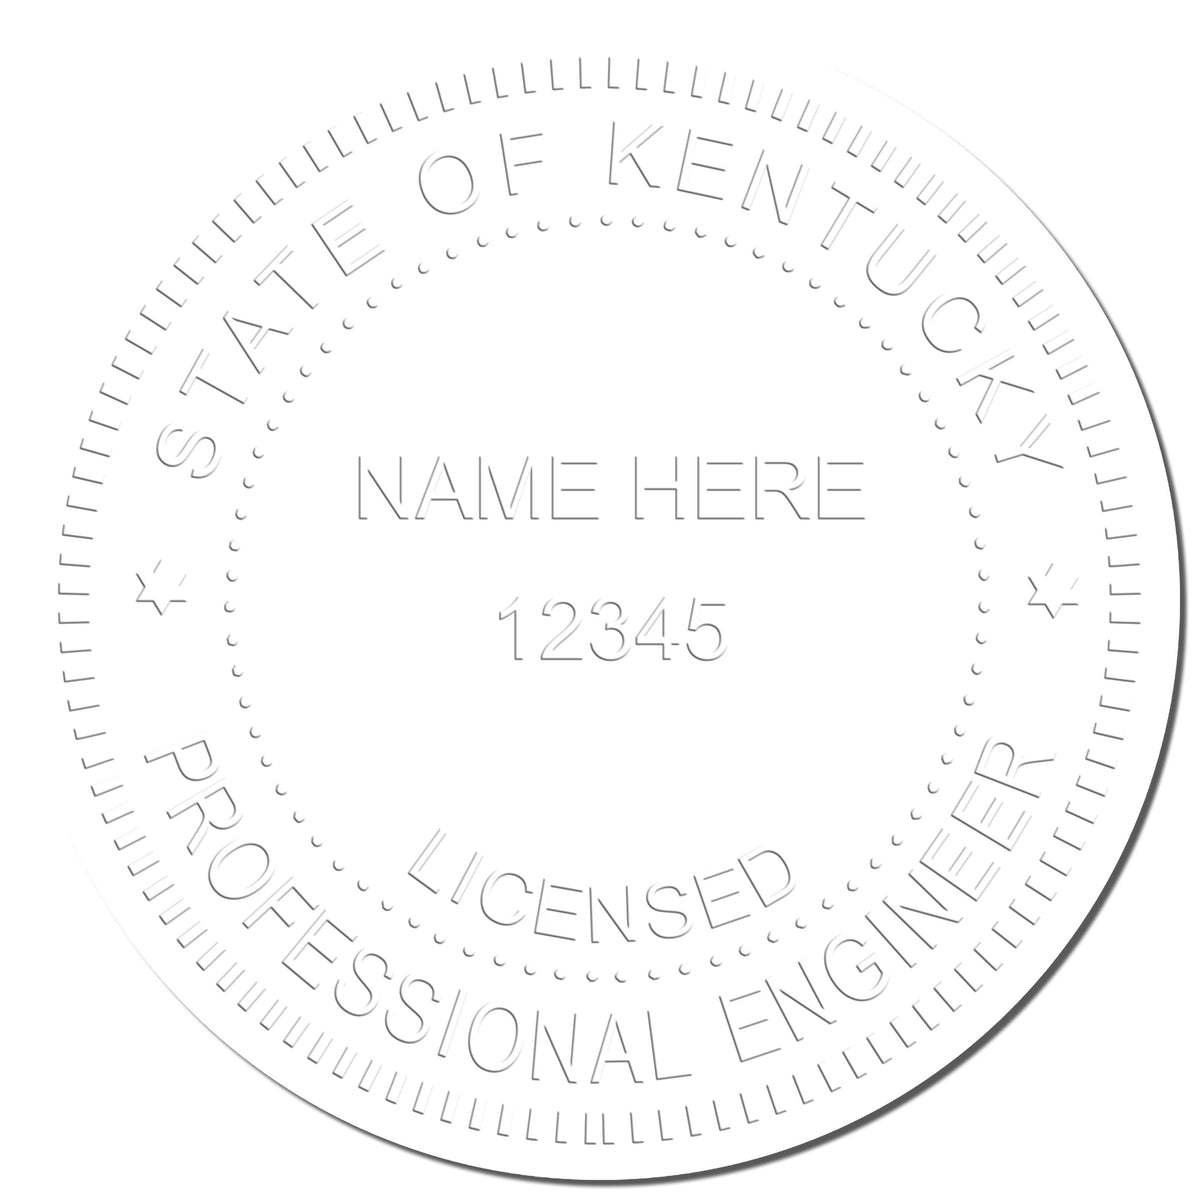 This paper is stamped with a sample imprint of the Heavy Duty Cast Iron Kentucky Engineer Seal Embosser, signifying its quality and reliability.